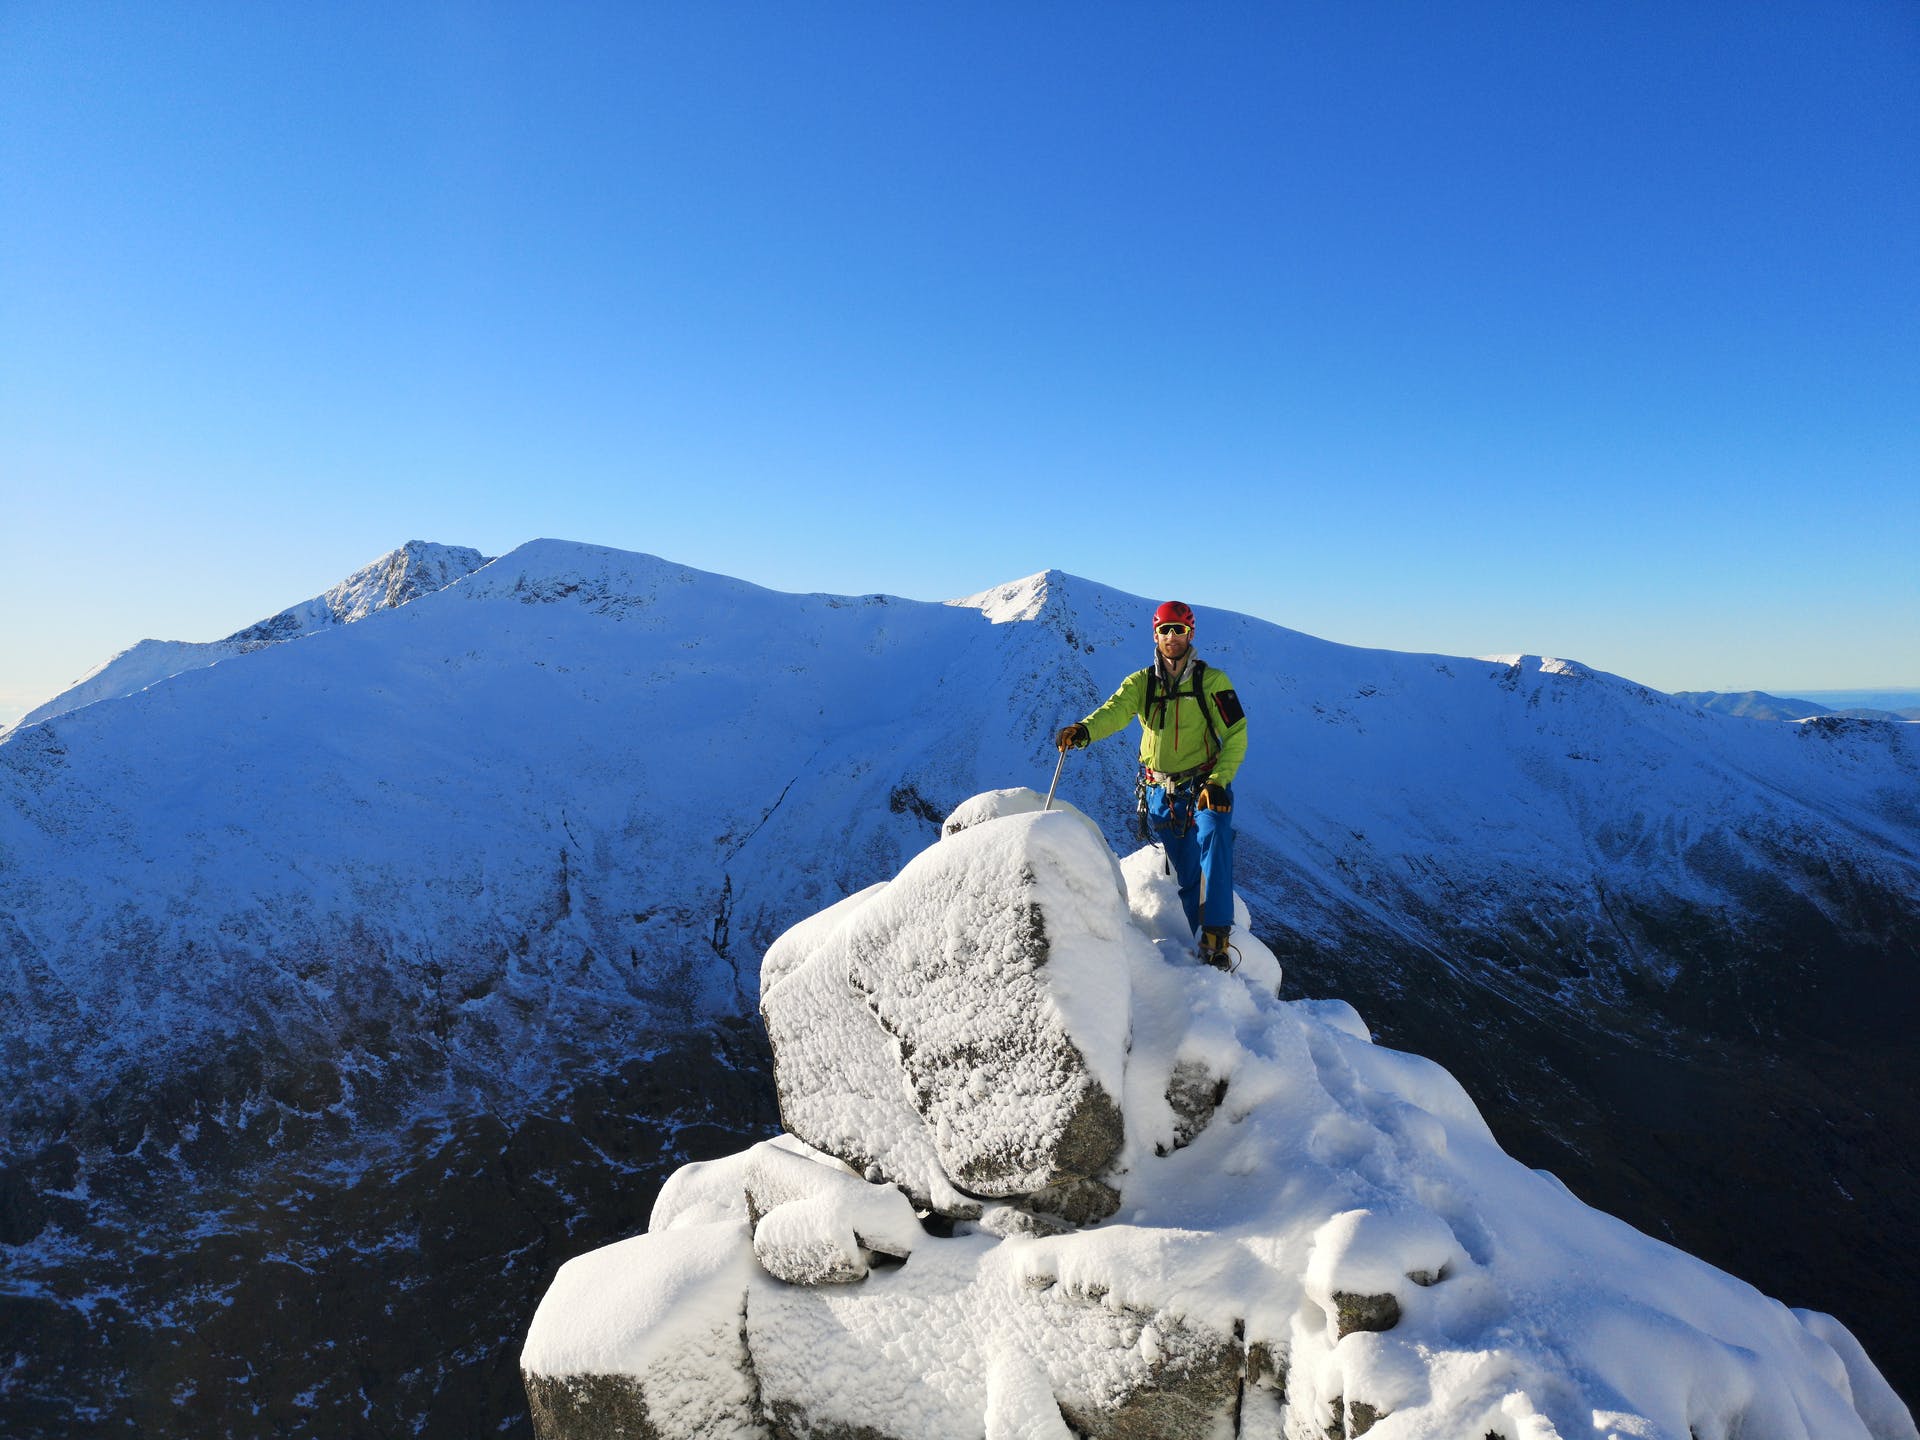 A mountaineer on the snow of Ben Nevis in winter.